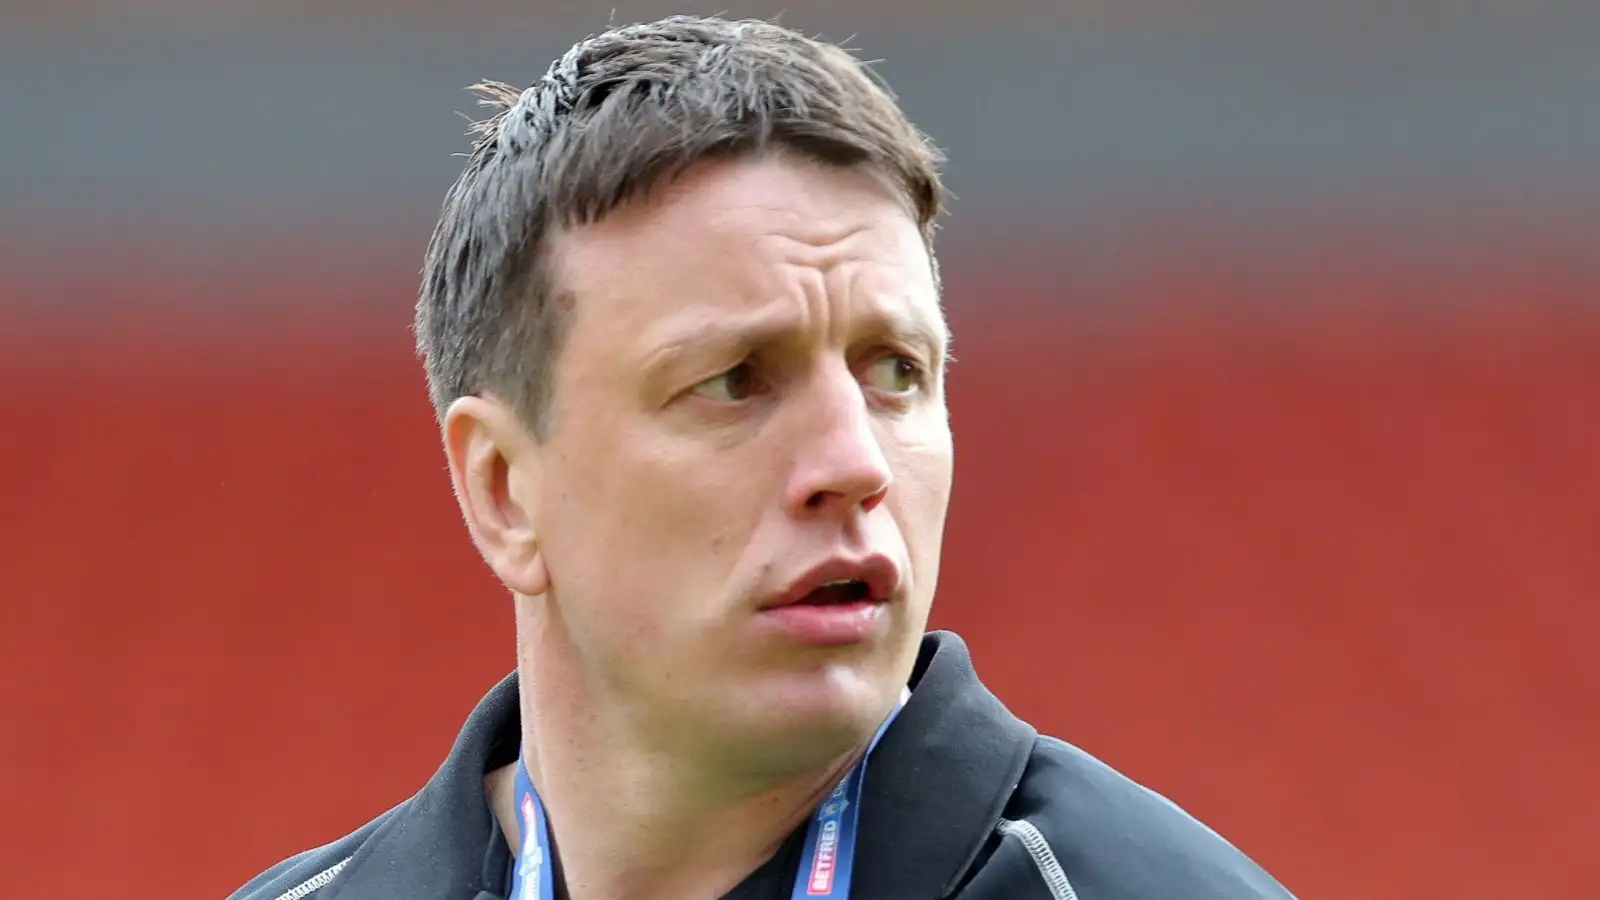 Widnes Vikings: League 1 coach ‘relieved of position’ amid speculation with vacant Championship job